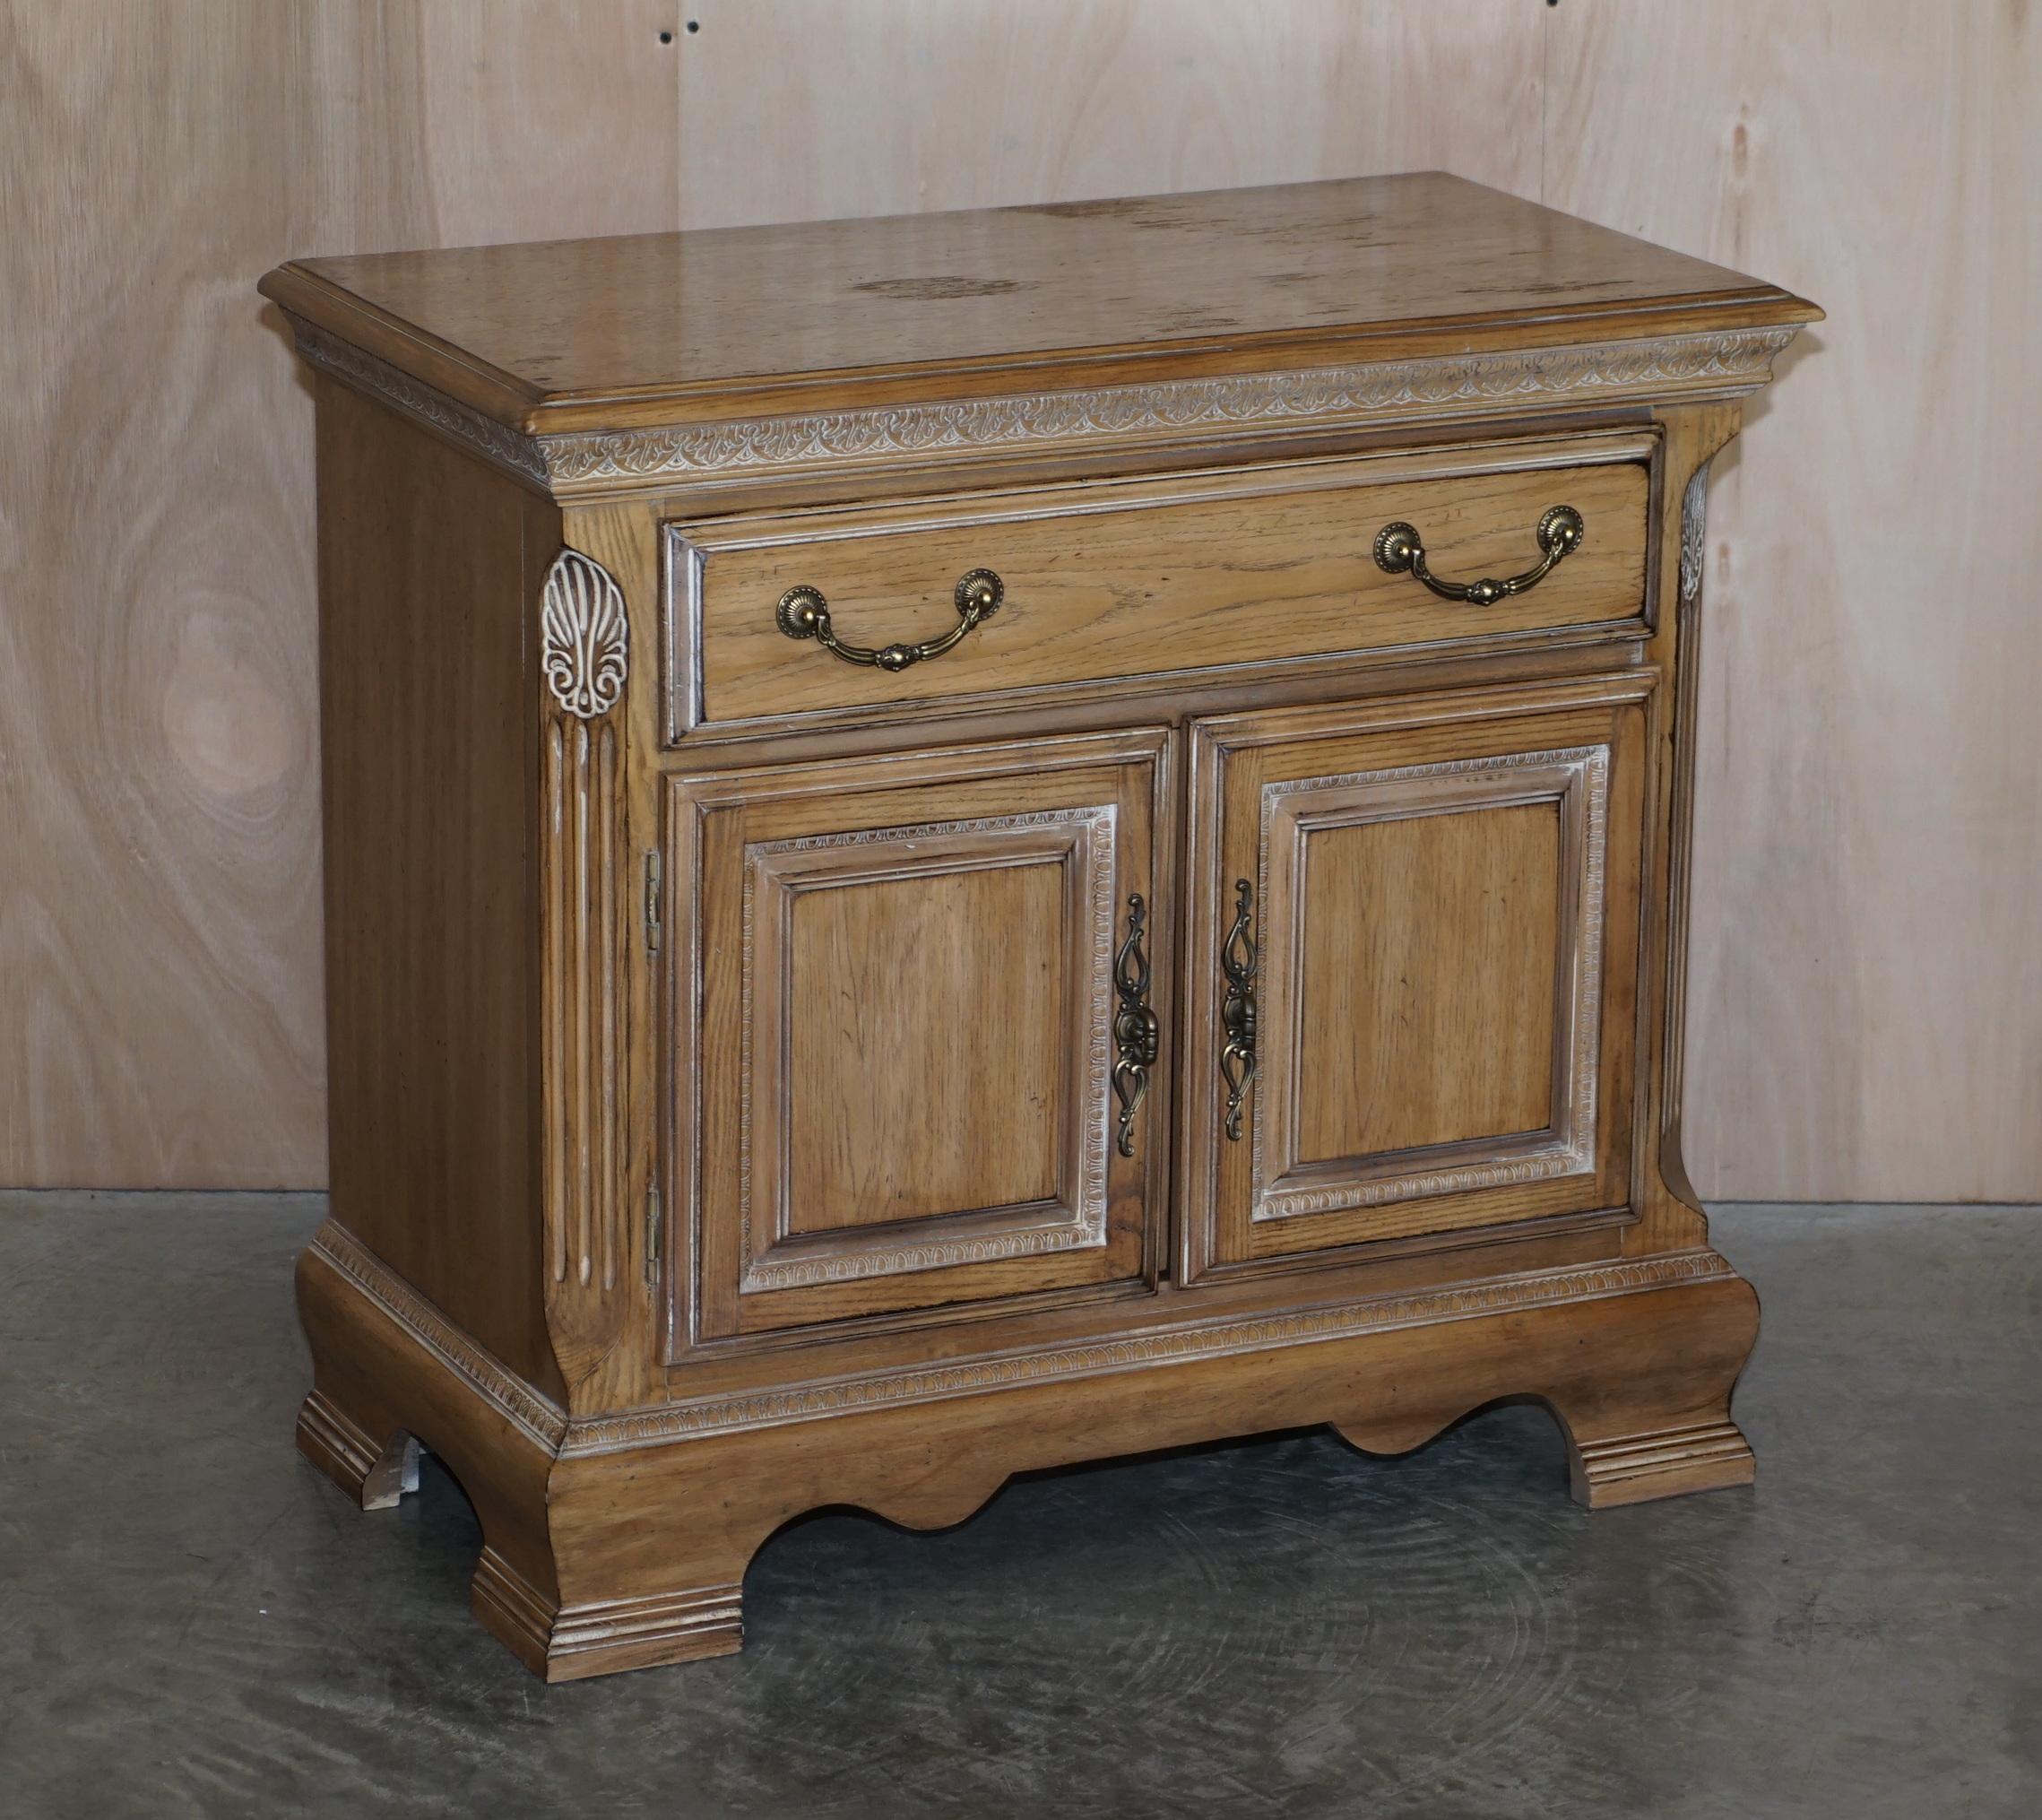 We are delighted to offer for sale this very decorative, ornately crafted pair of Limed Oak bedside table nightstands

This pair are part of a suite

A very good looking and expertly crafted pair, they can be used in the bedroom context as